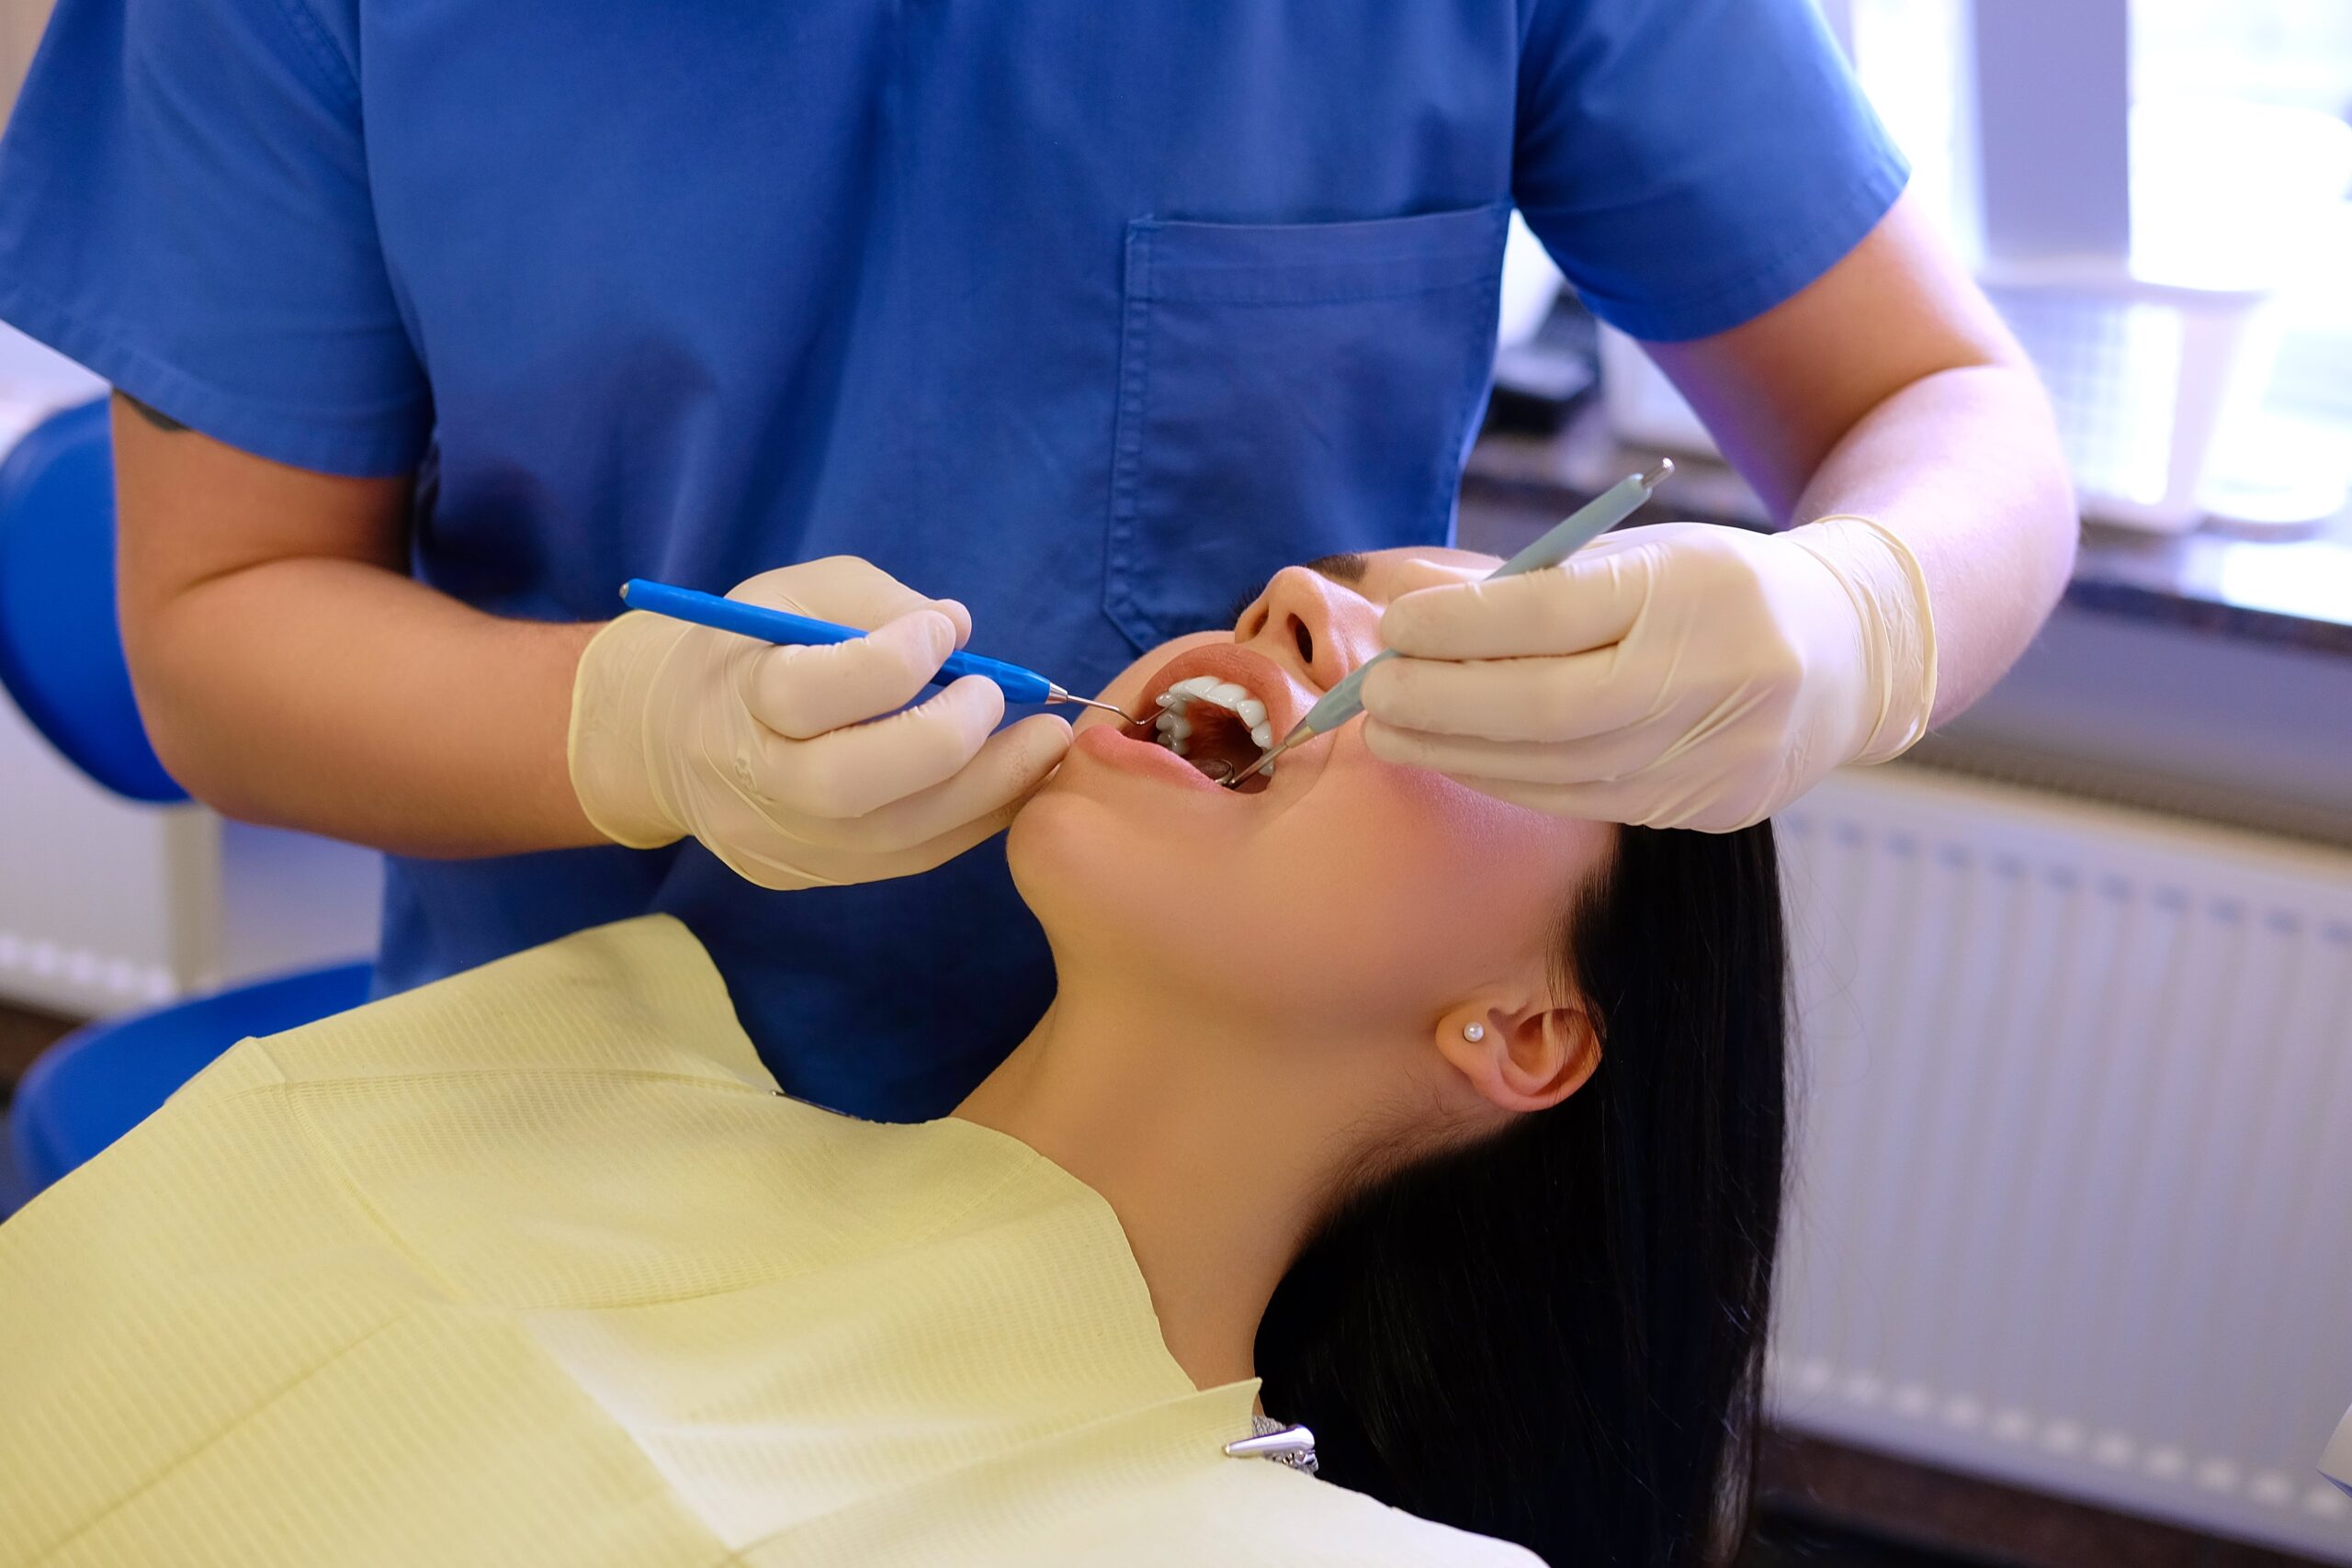 How can emergency dental services assist you in any way